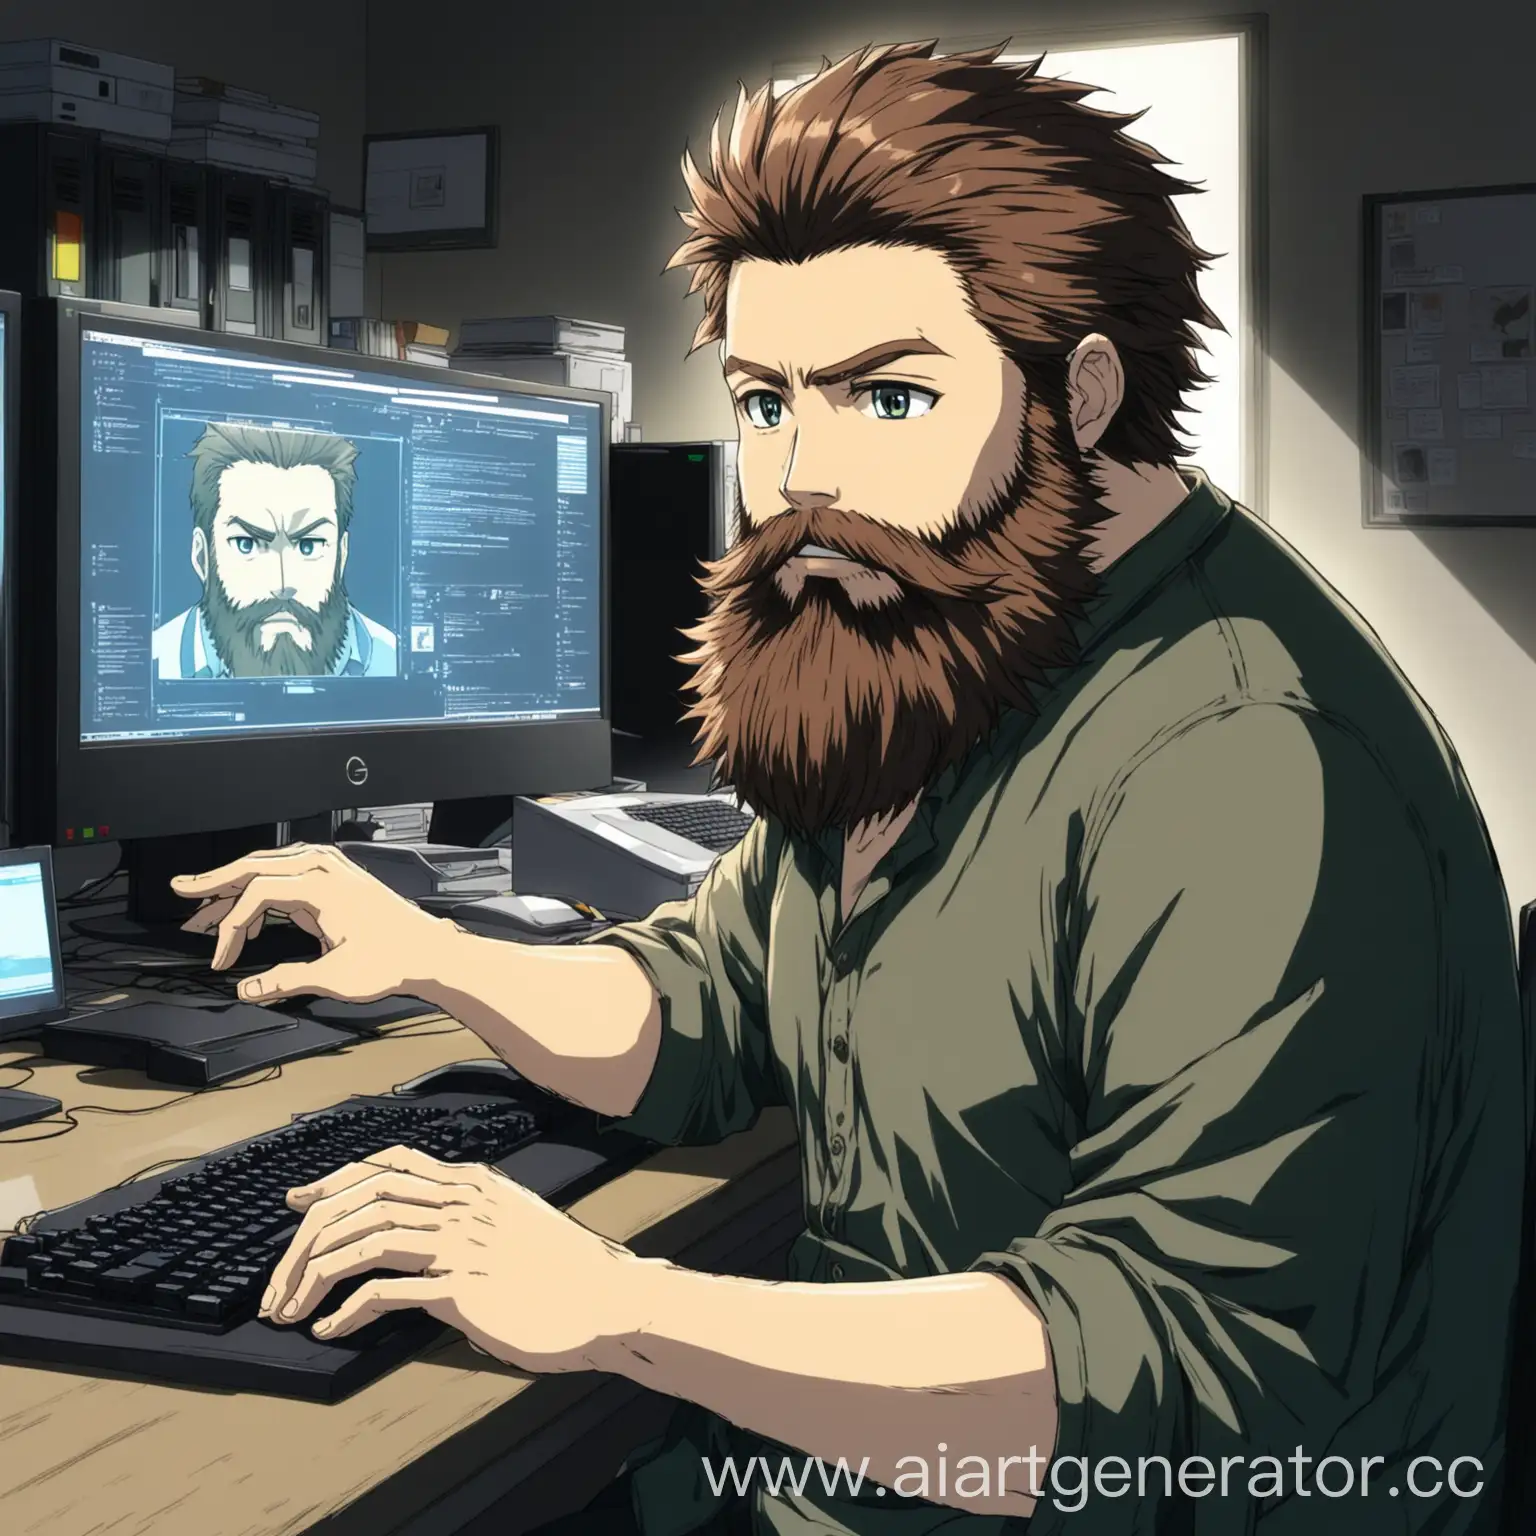 Anime Art of a bearded man at a computer
